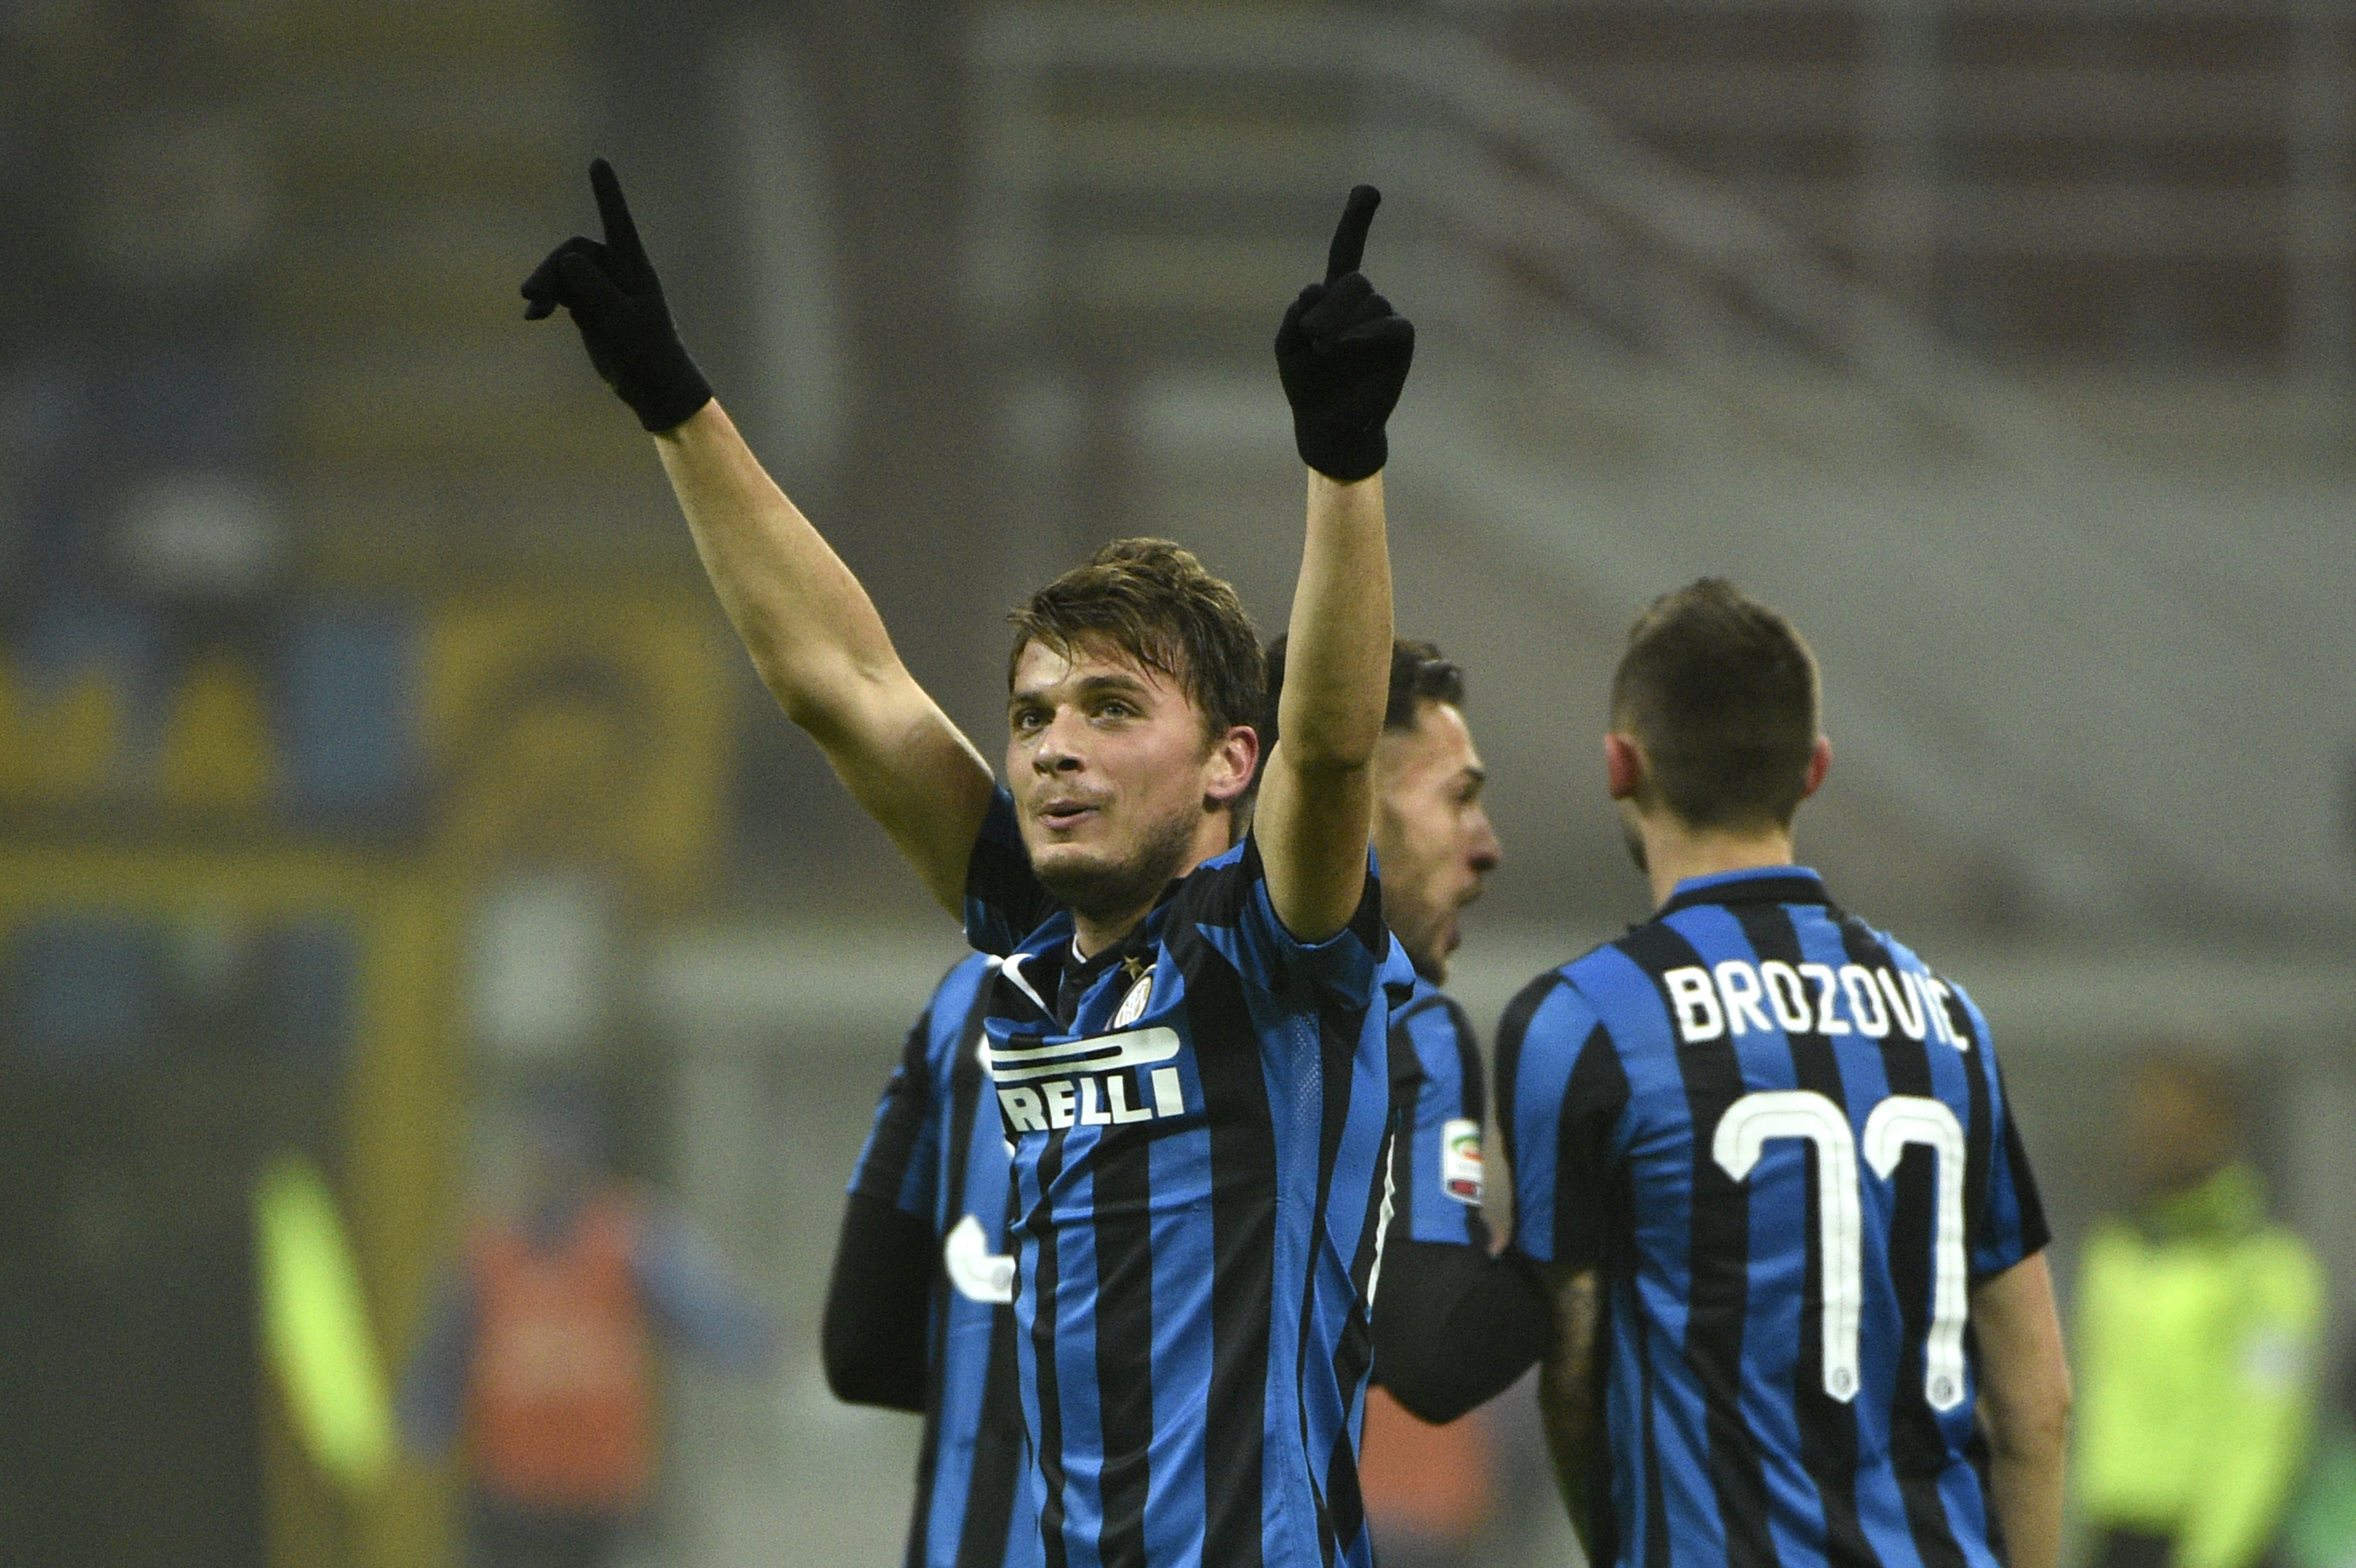 Ljajic: “I hope they are kicking themselves at Roma”